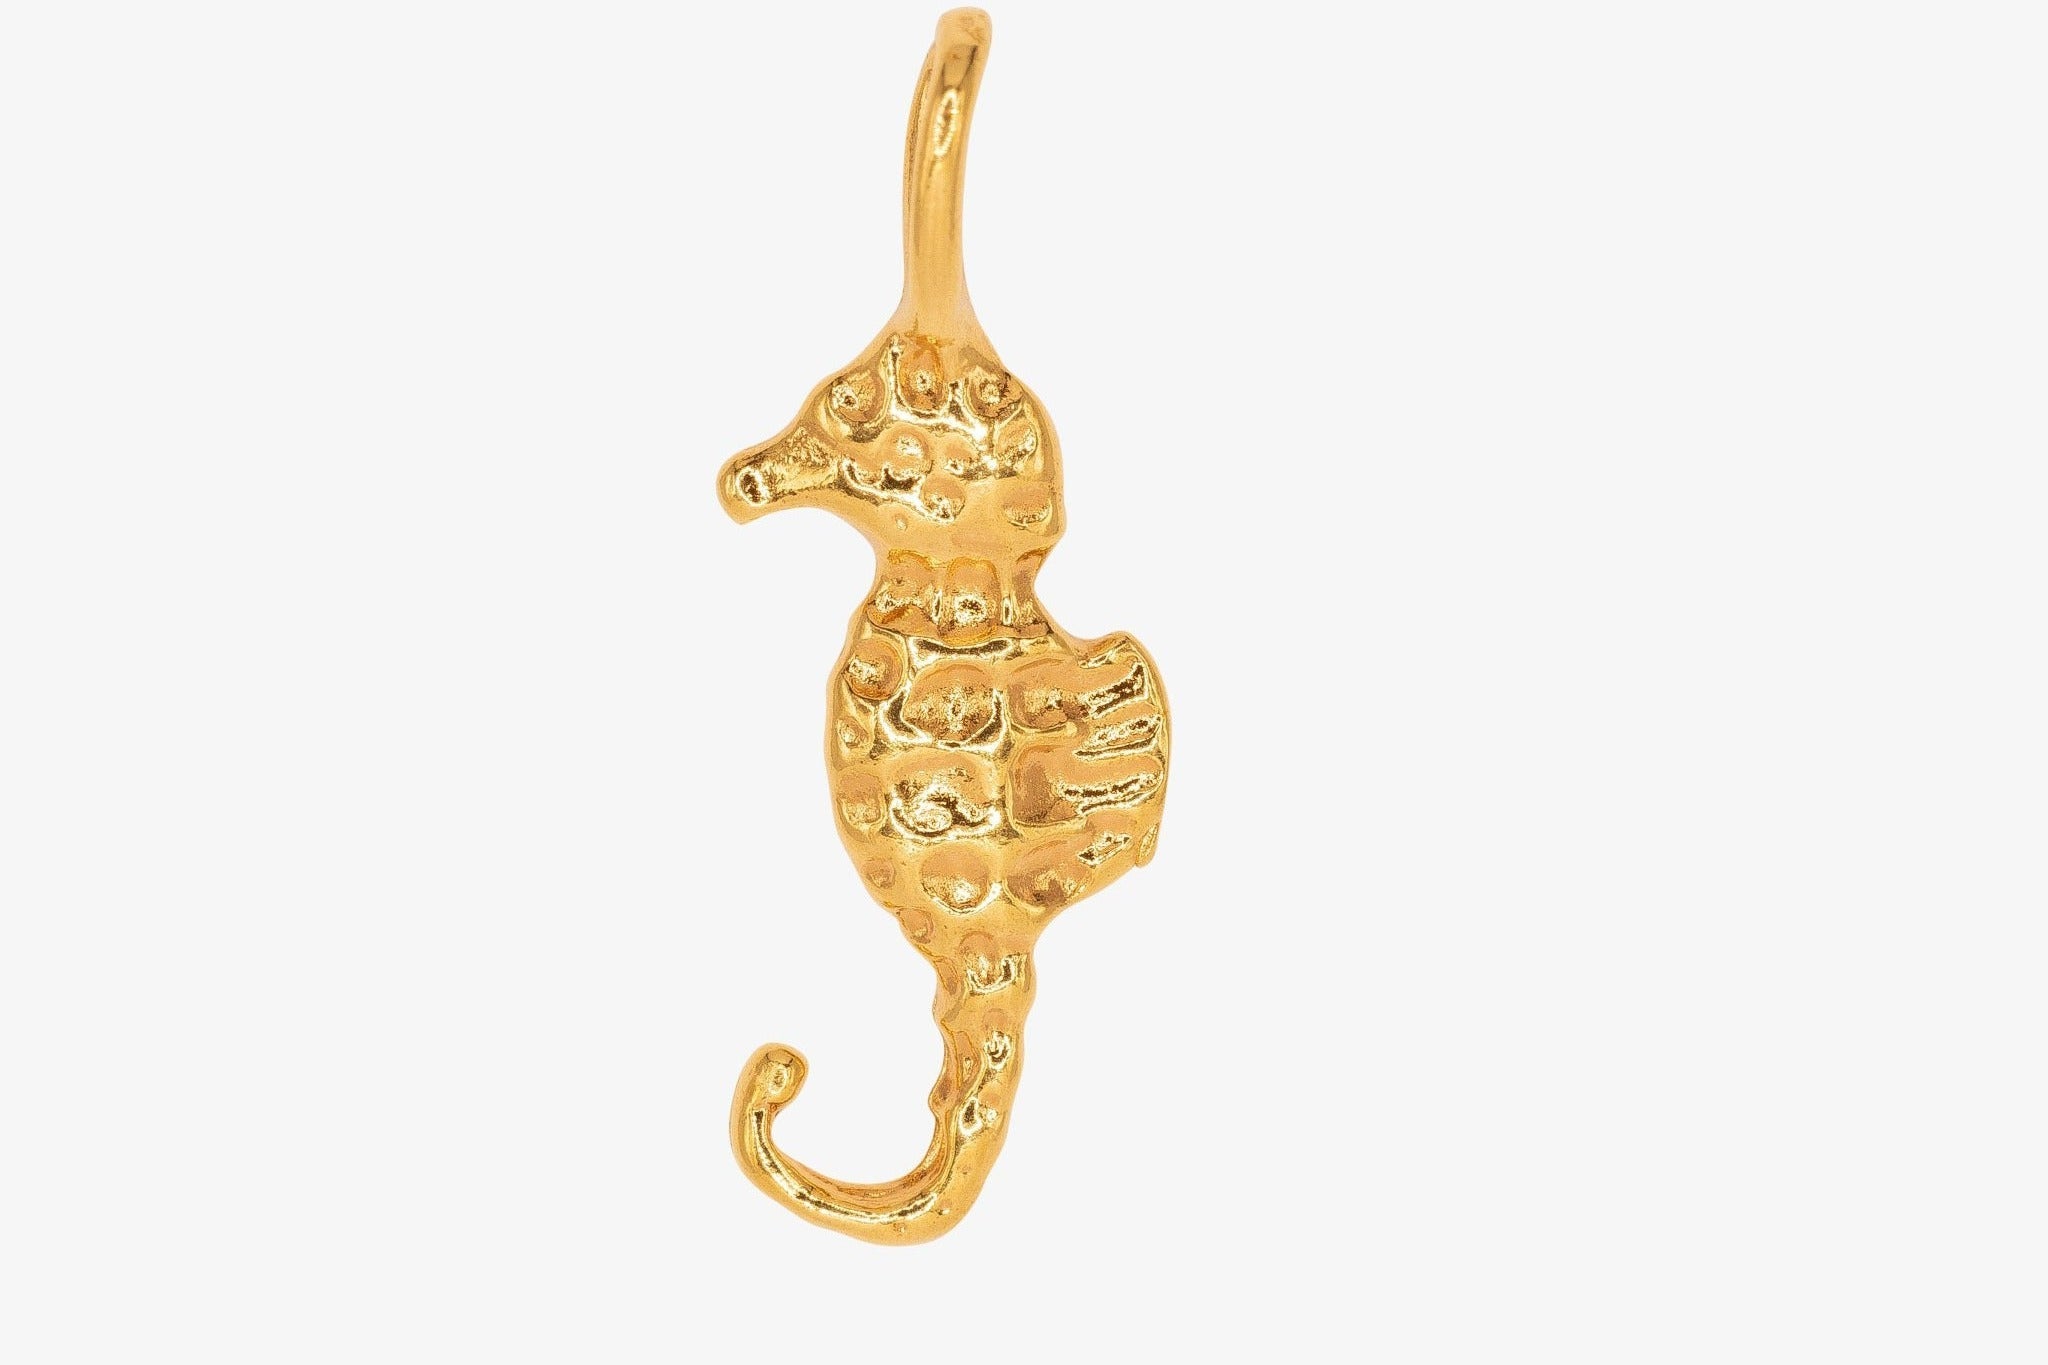 Seahorse Charm Wholesale 14K Gold, Solid 14K Gold, G141 - HarperCrown